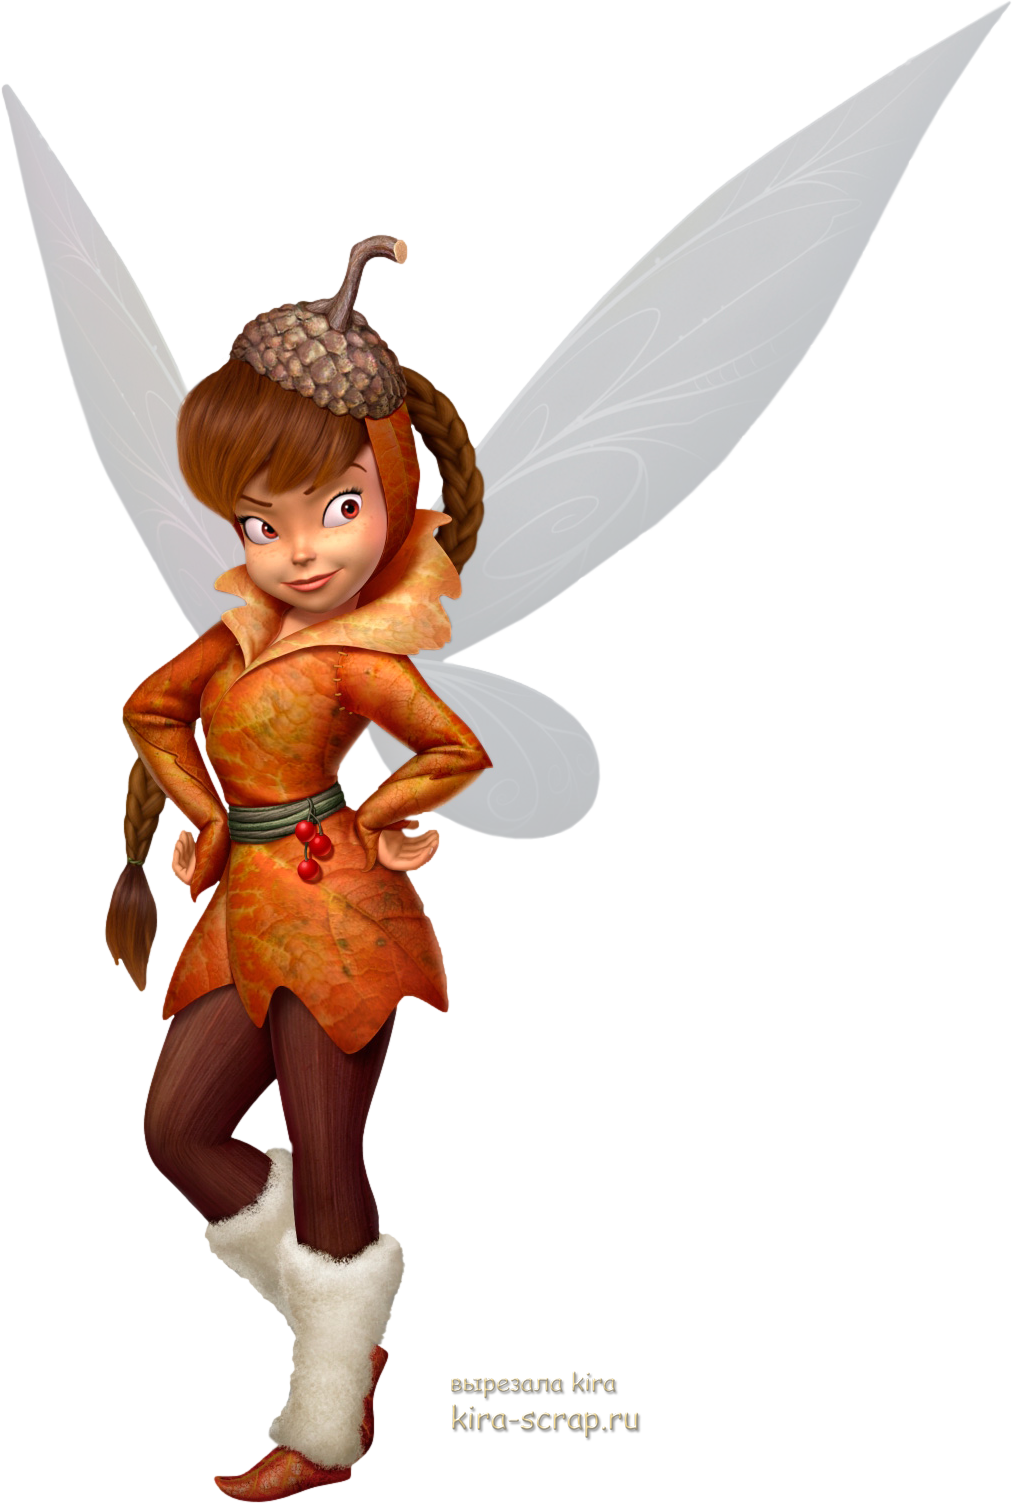 Fawn - Tinkerbell Characters Fawn (1012x1503)